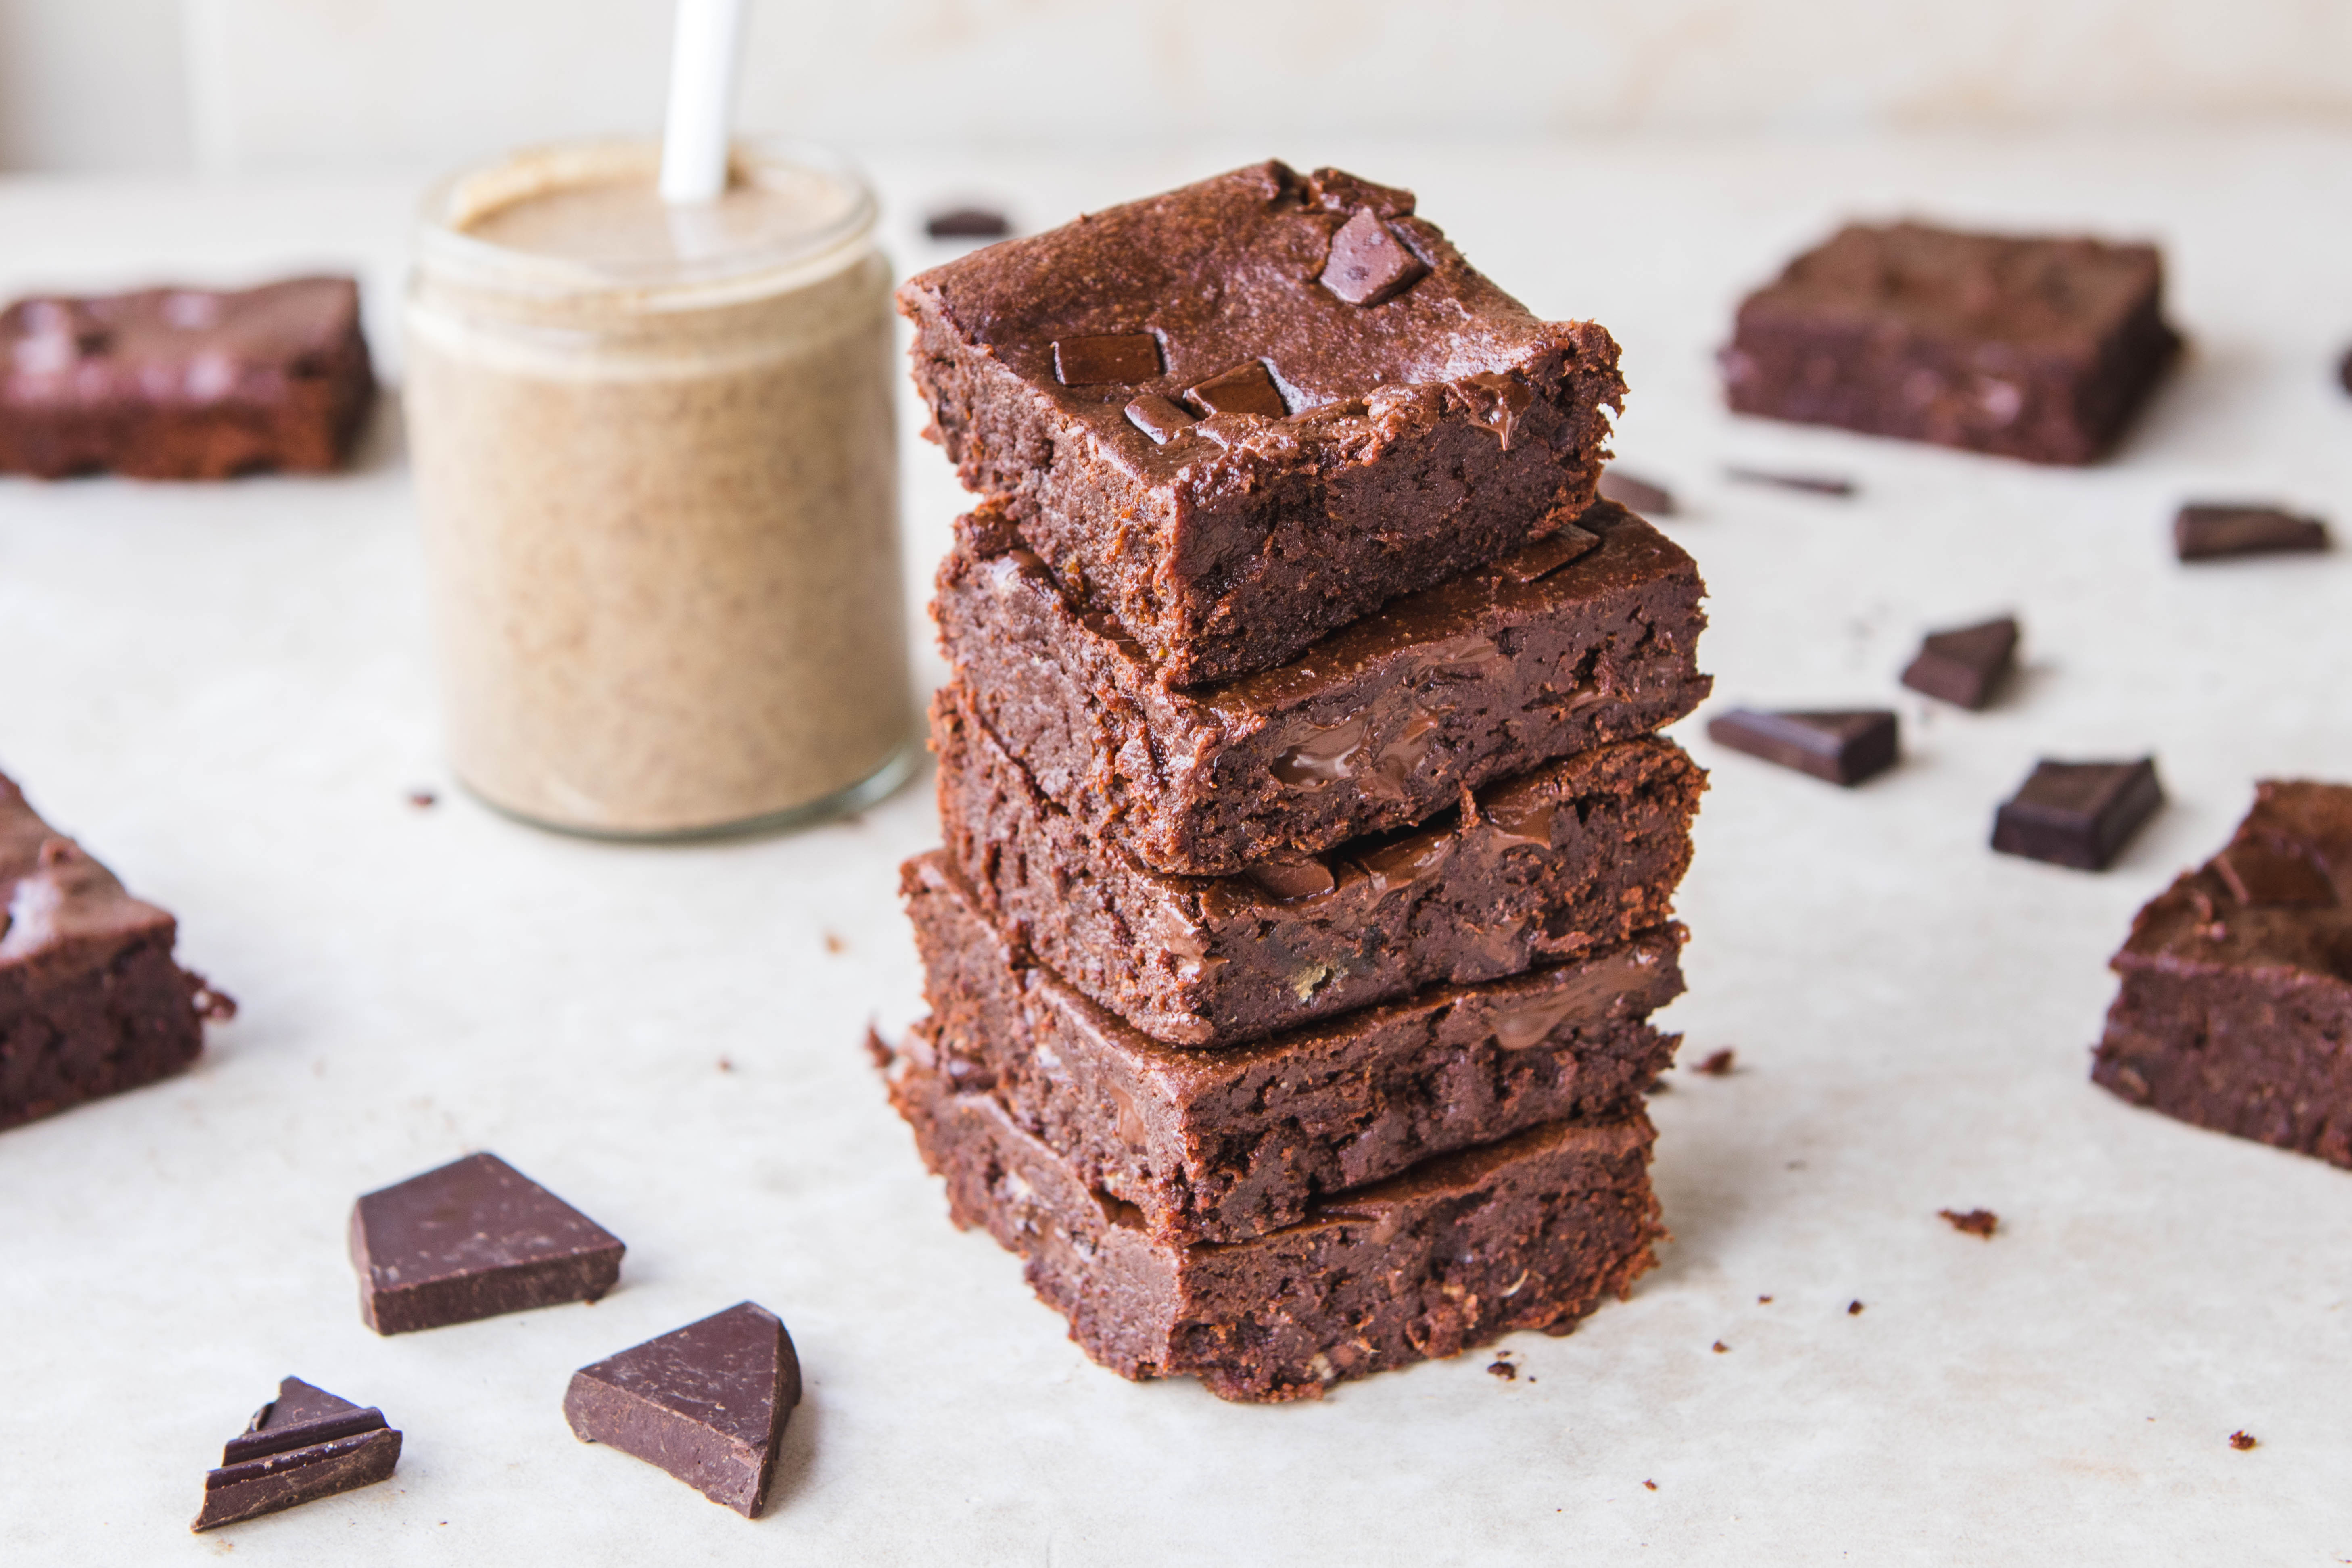 How To Make Anti-Inflammatory Almond Butter Brownies?